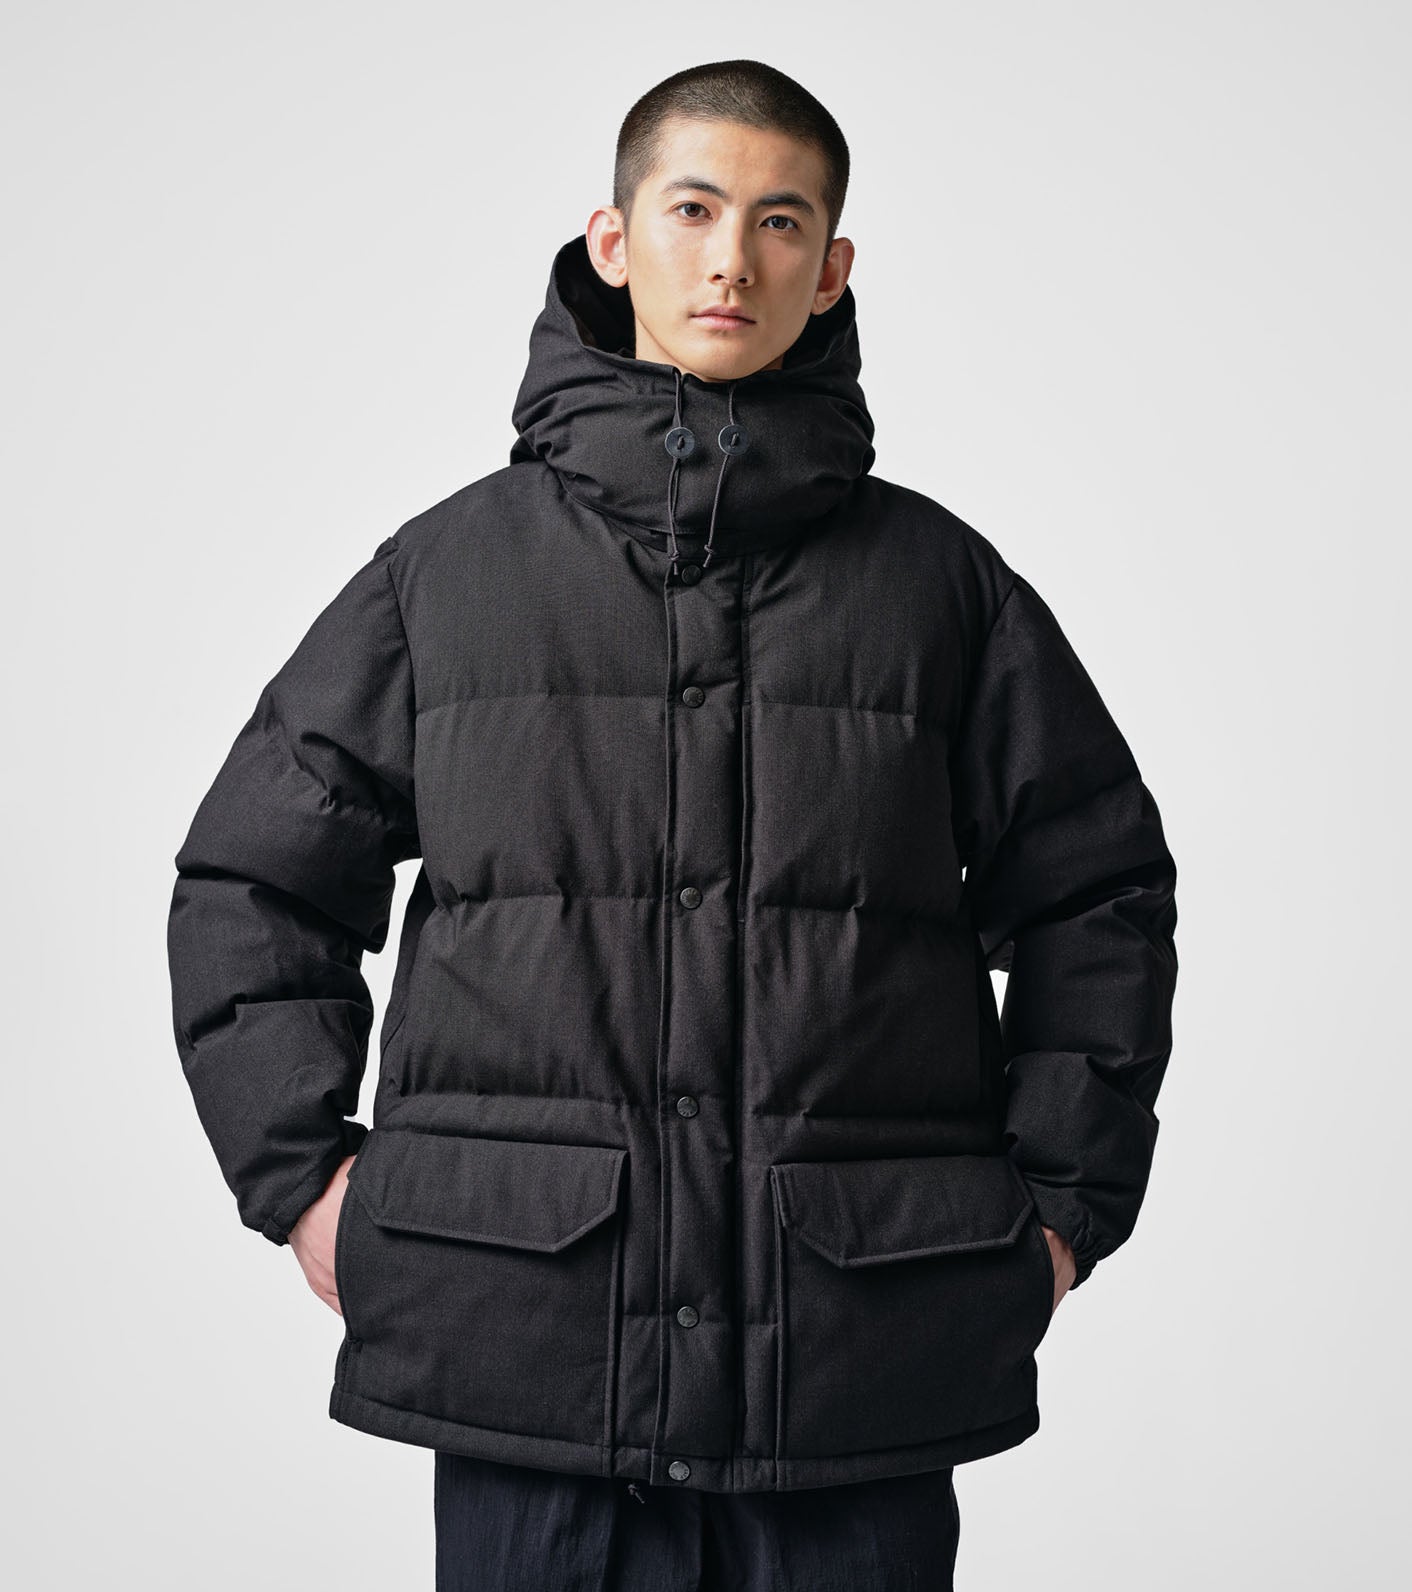 THE NORTH FACE PURPLE LABEL x Spiber Sierra Parka – unexpected store